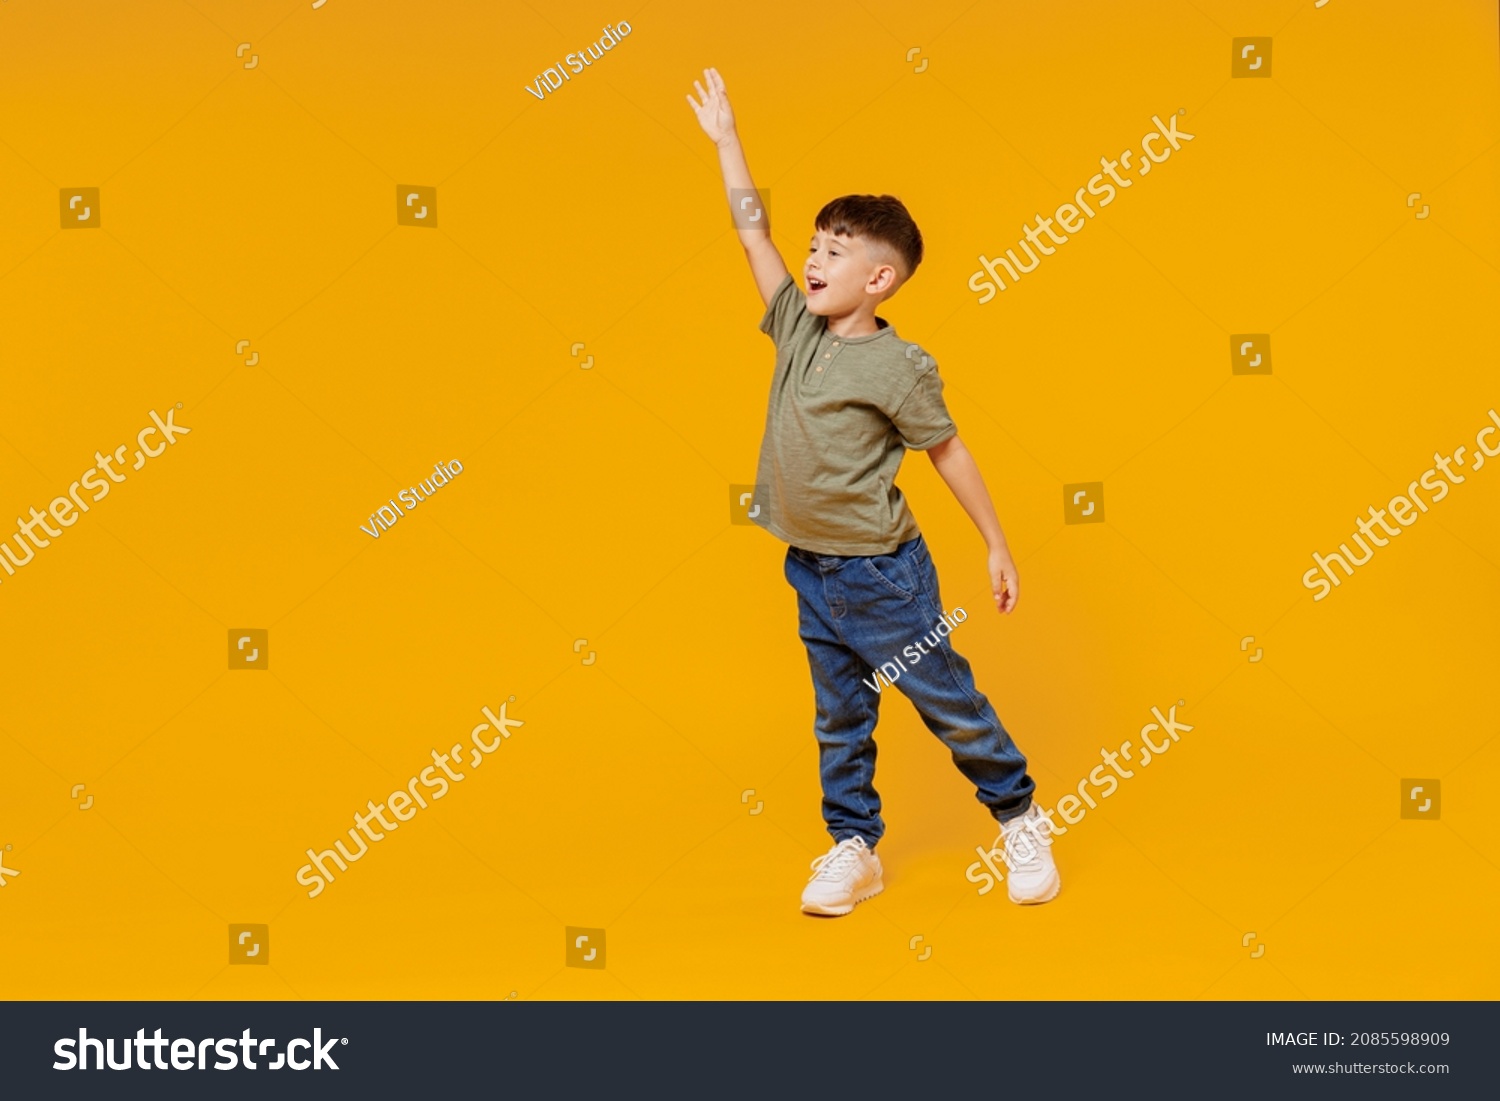 Full body side view little small smiling happy boy 6-7 years old wear green t-shirt walk go waving hand isolated on plain yellow background studio portrait. Mother's Day love family lifestyle concept #2085598909